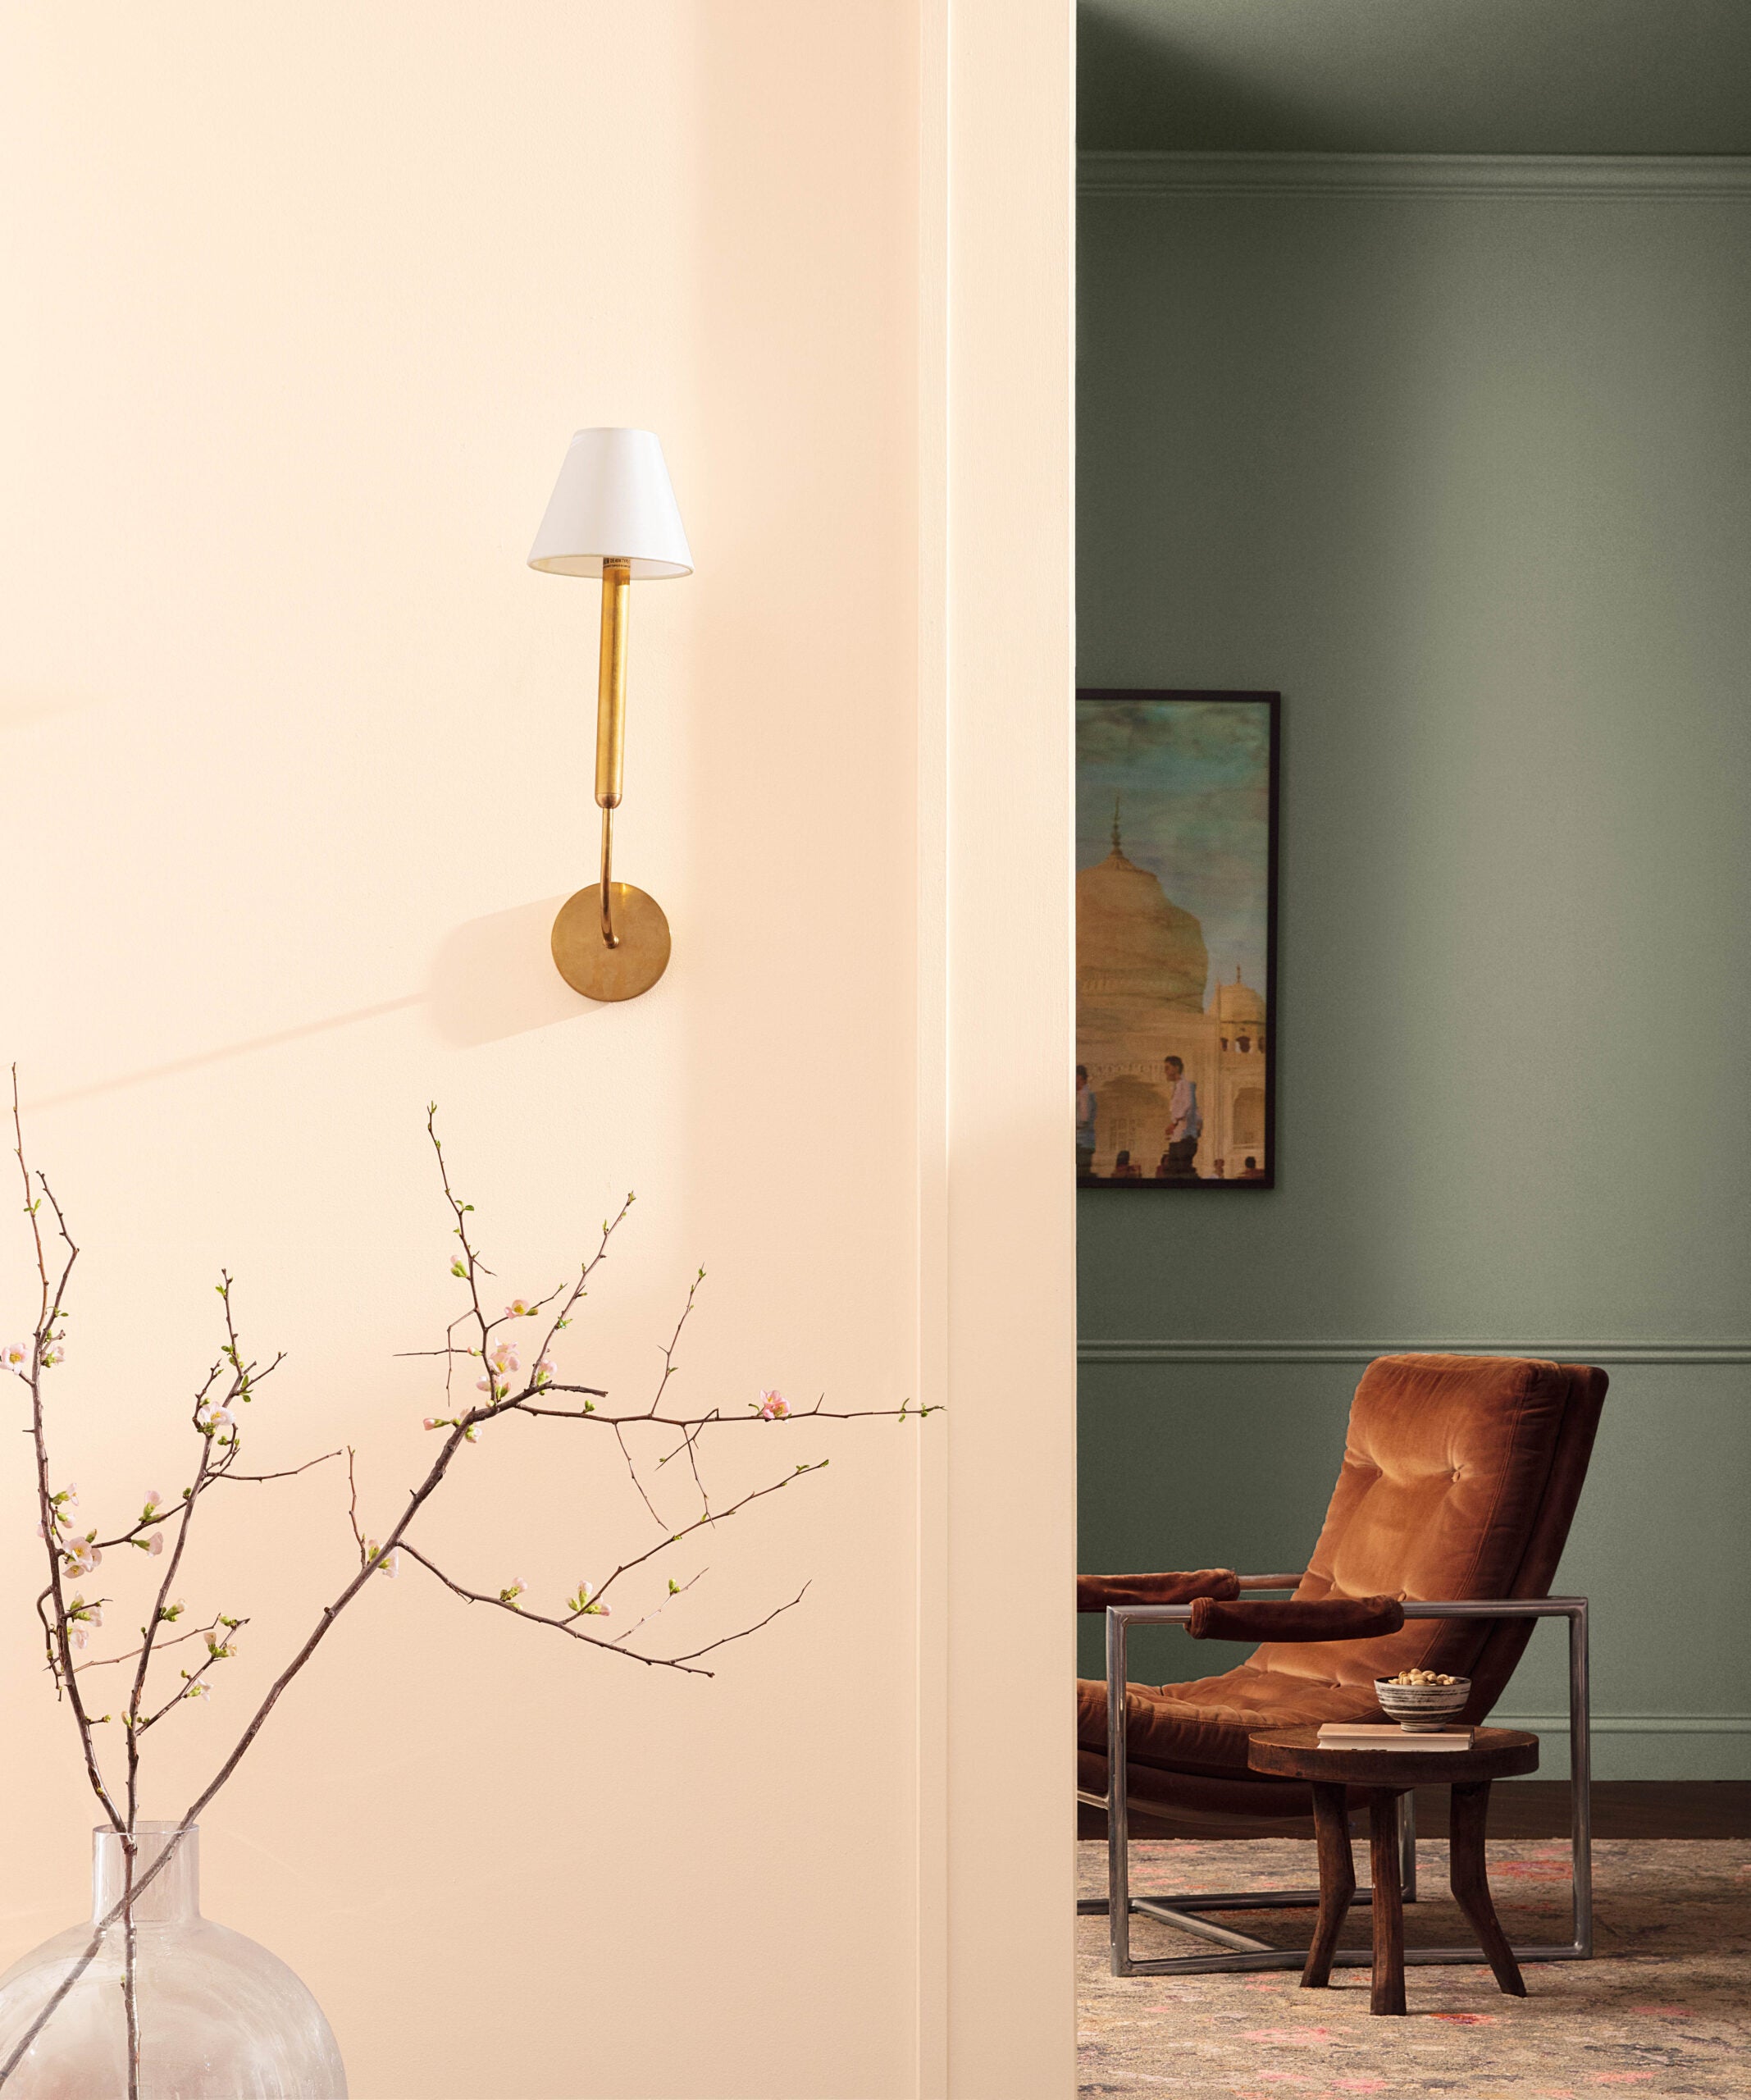 A white wall with a gold wall sconce affixed to it stands next to a background wall painted in antique pewter (a green-grey hue). Half a painting and a suede chair are visible from this angle.